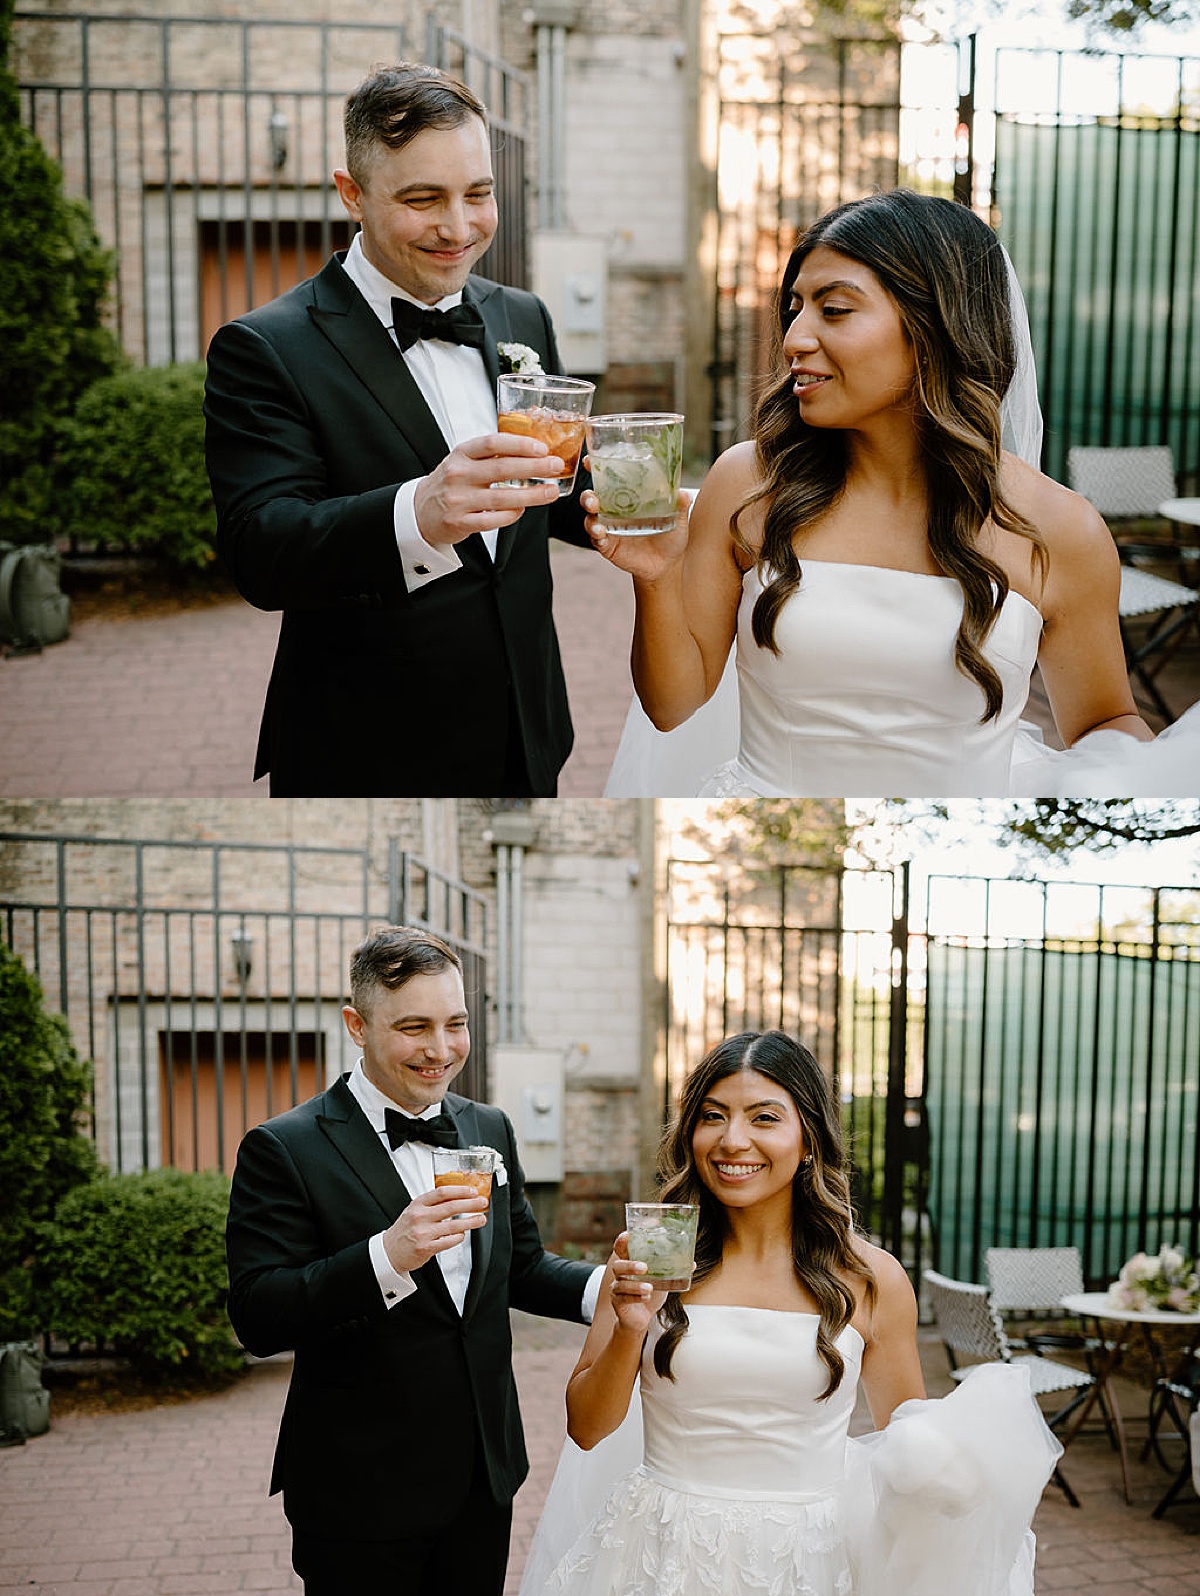 classy bride and groom celebrate with artisanal cocktails after ceremony shot by Chicago wedding photographer